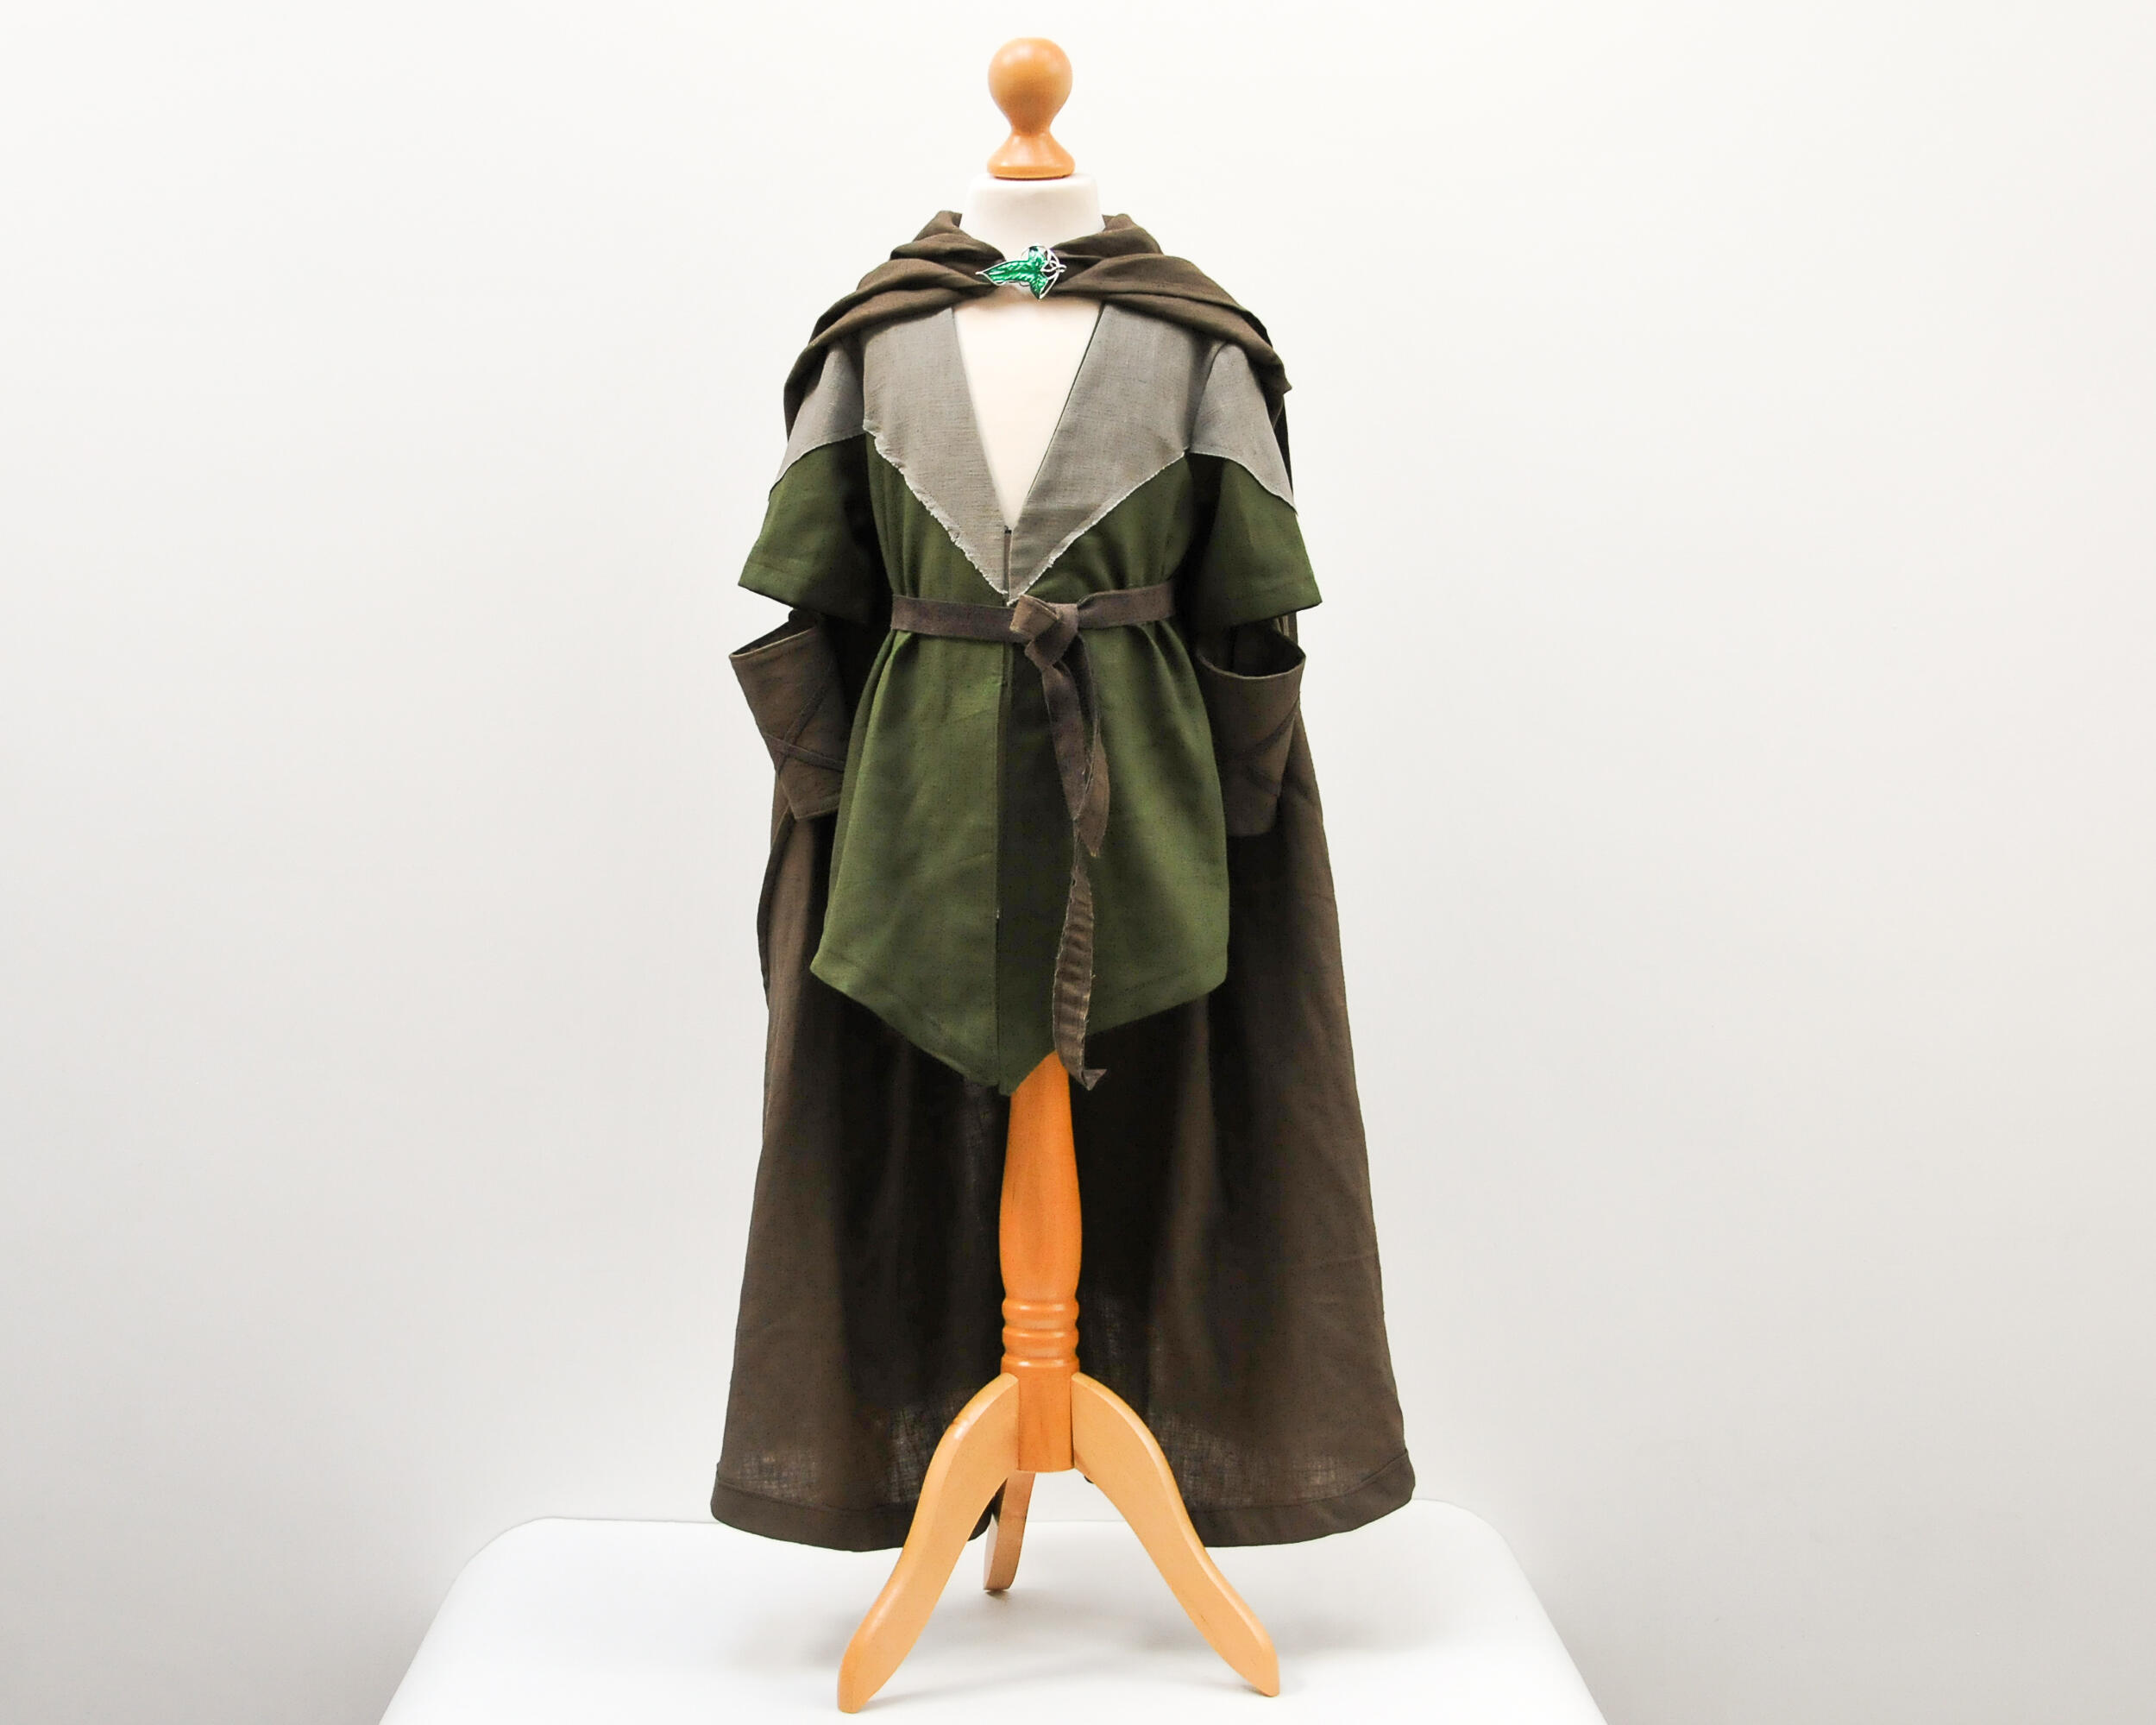 Lord of the Rings inspired Elf kids costume for Halloween made of pure linen